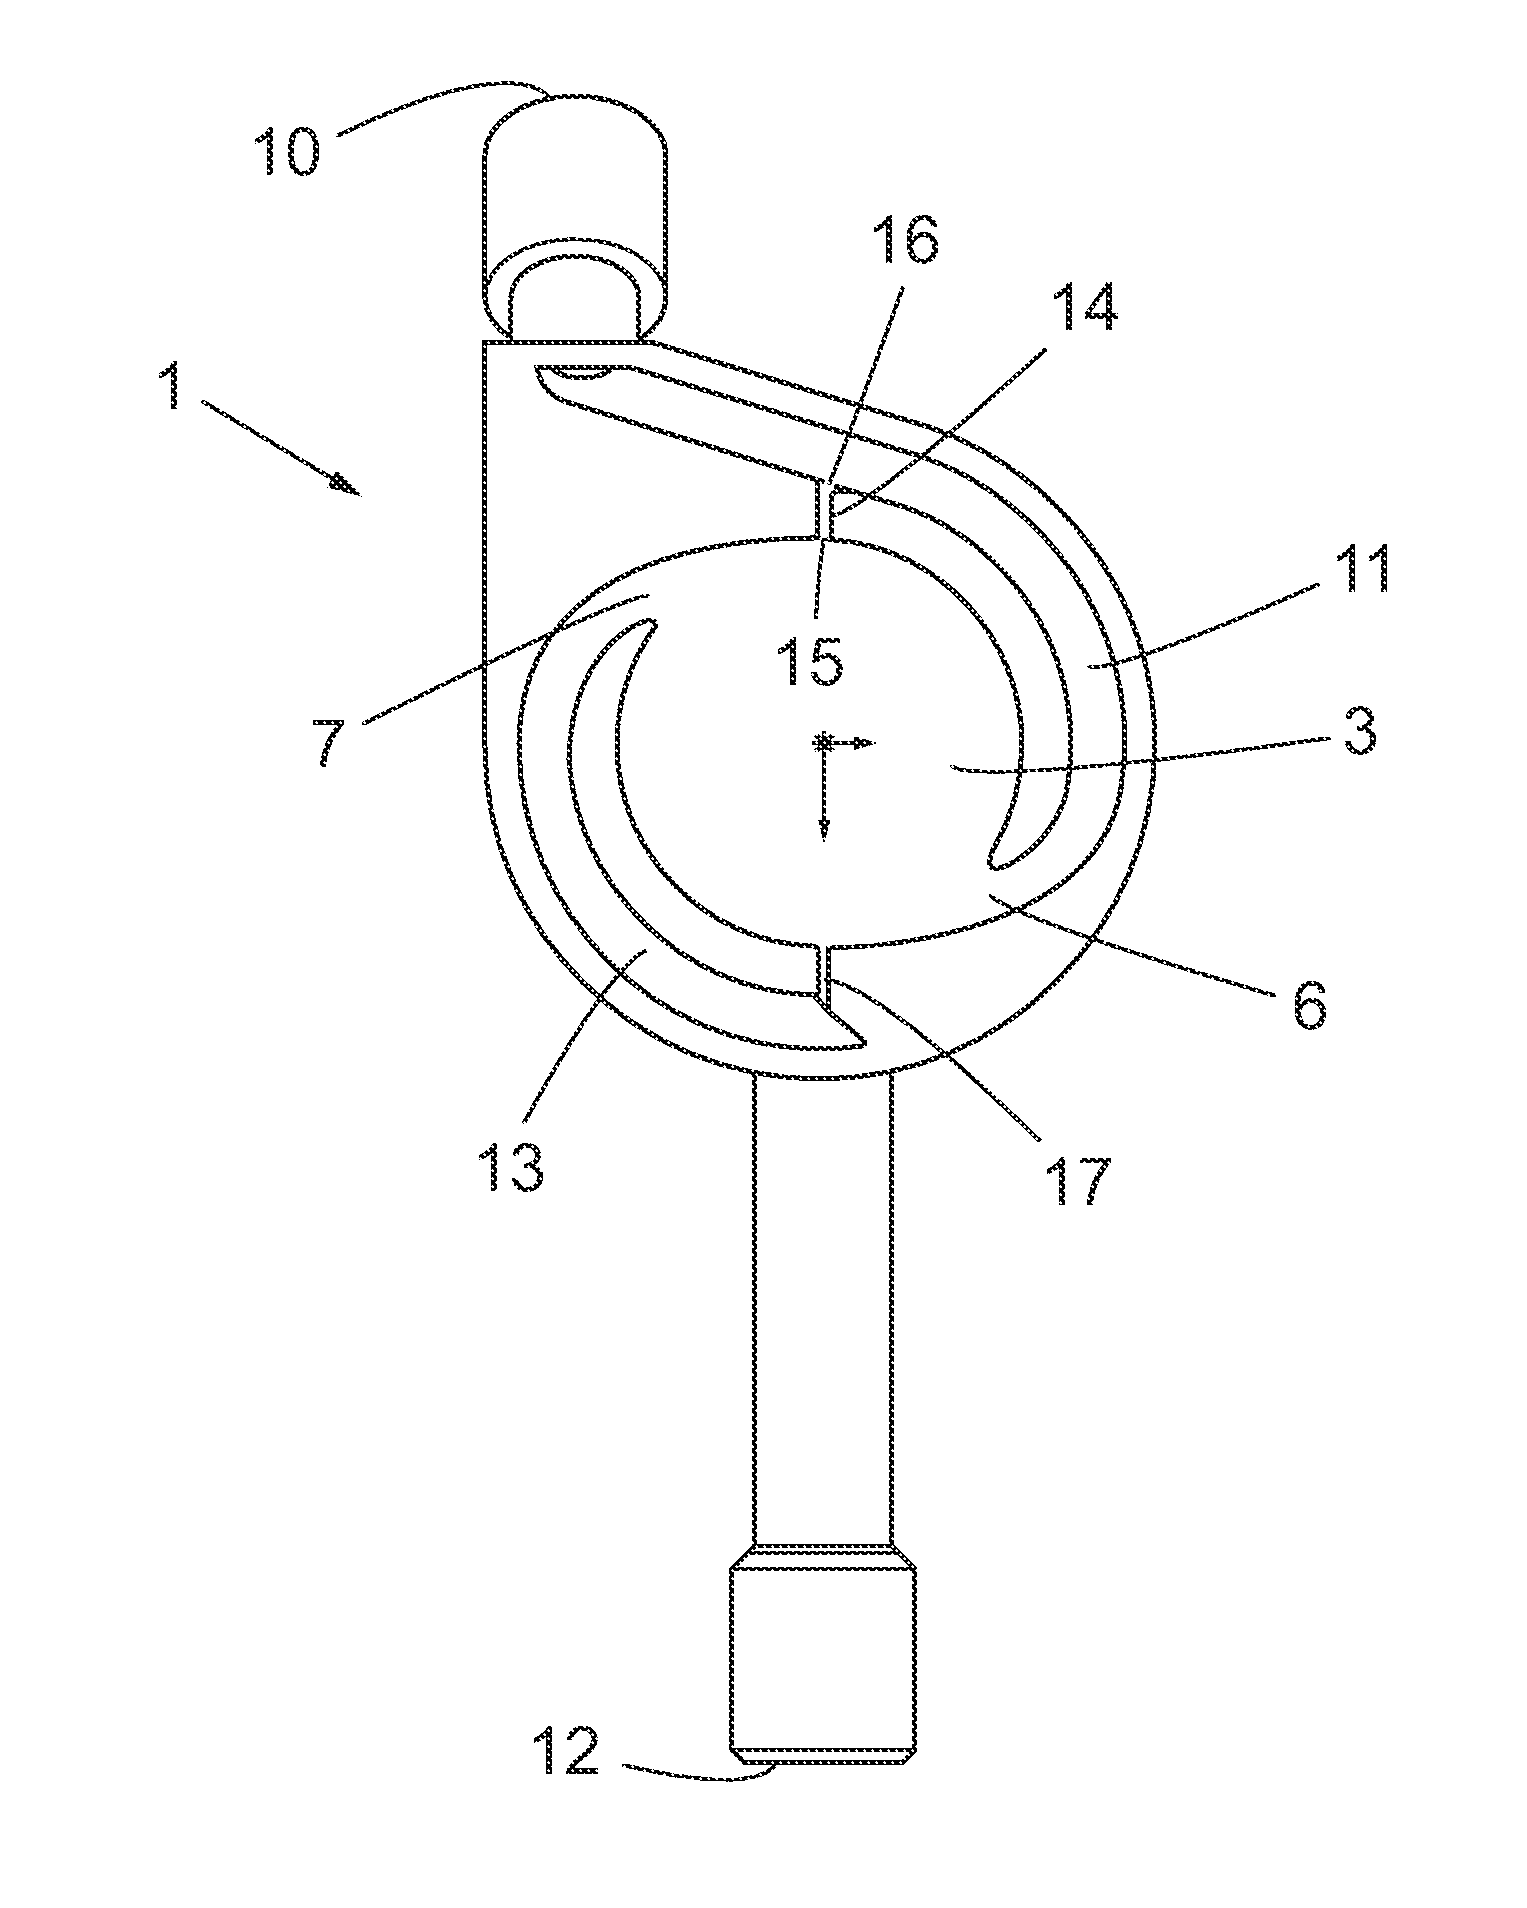 Pressure sensing device and use of the same in a connecting structure